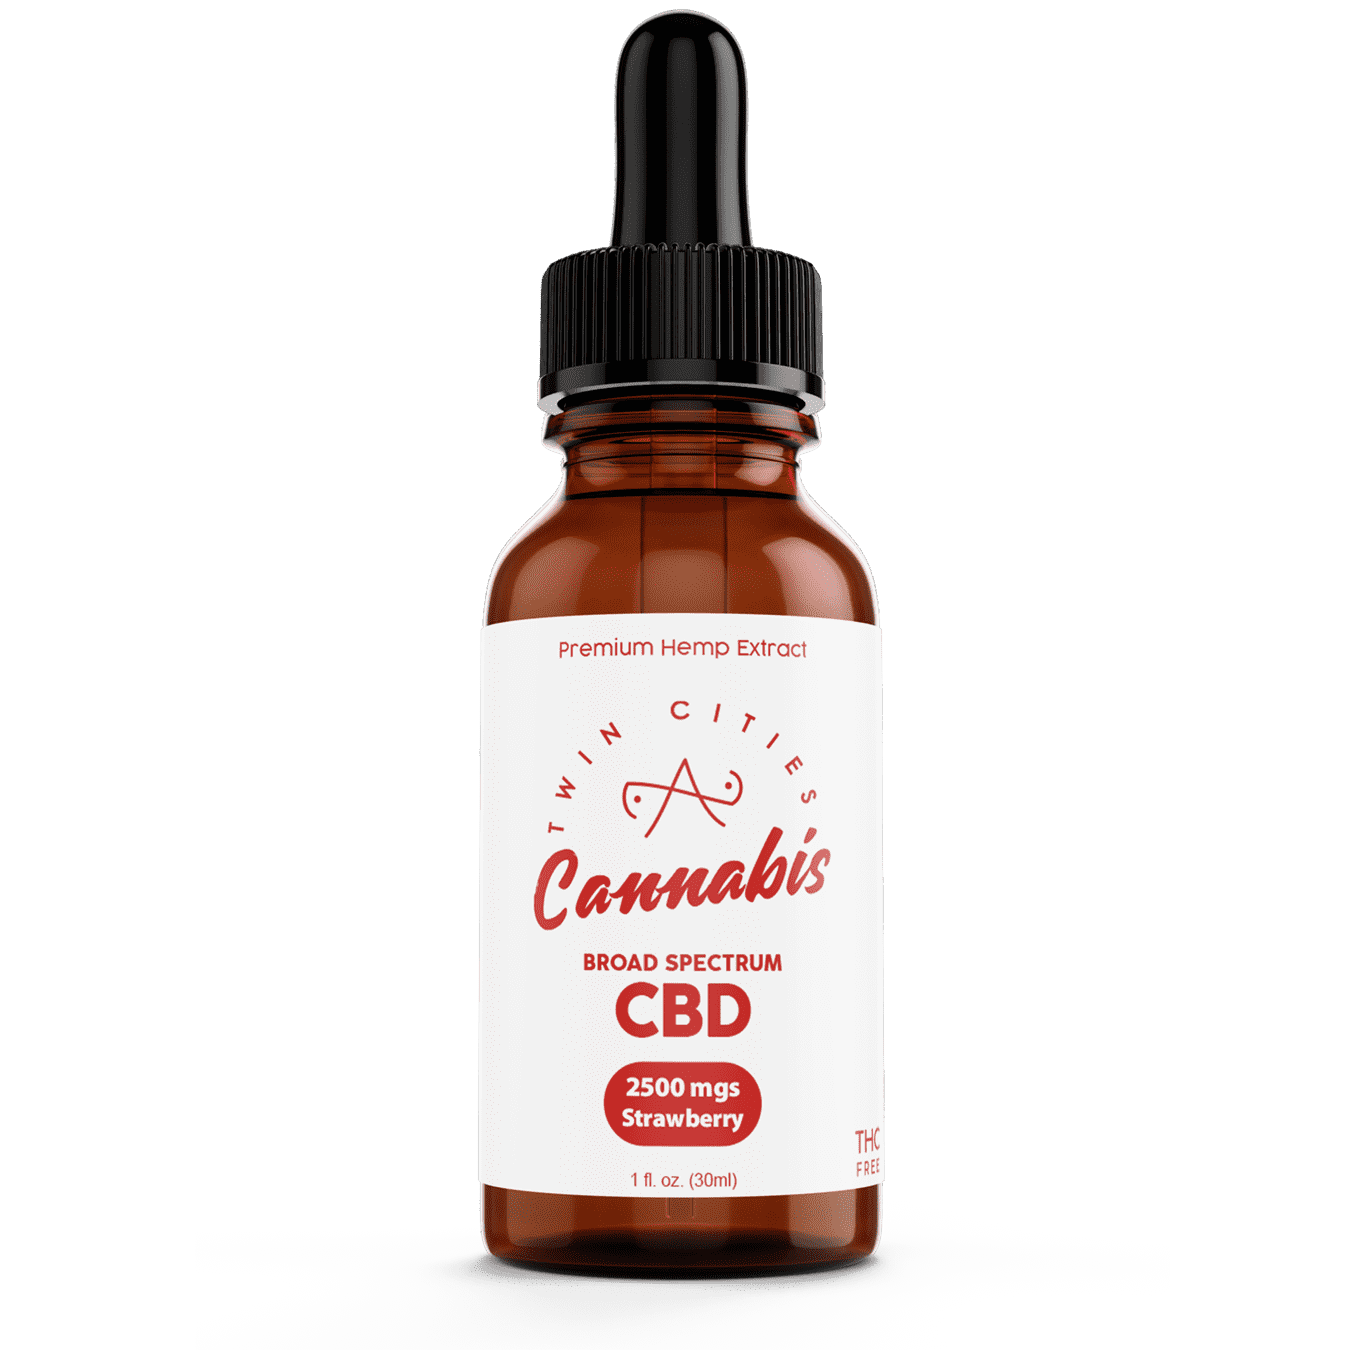 Can CBD Treat Skin Conditions?